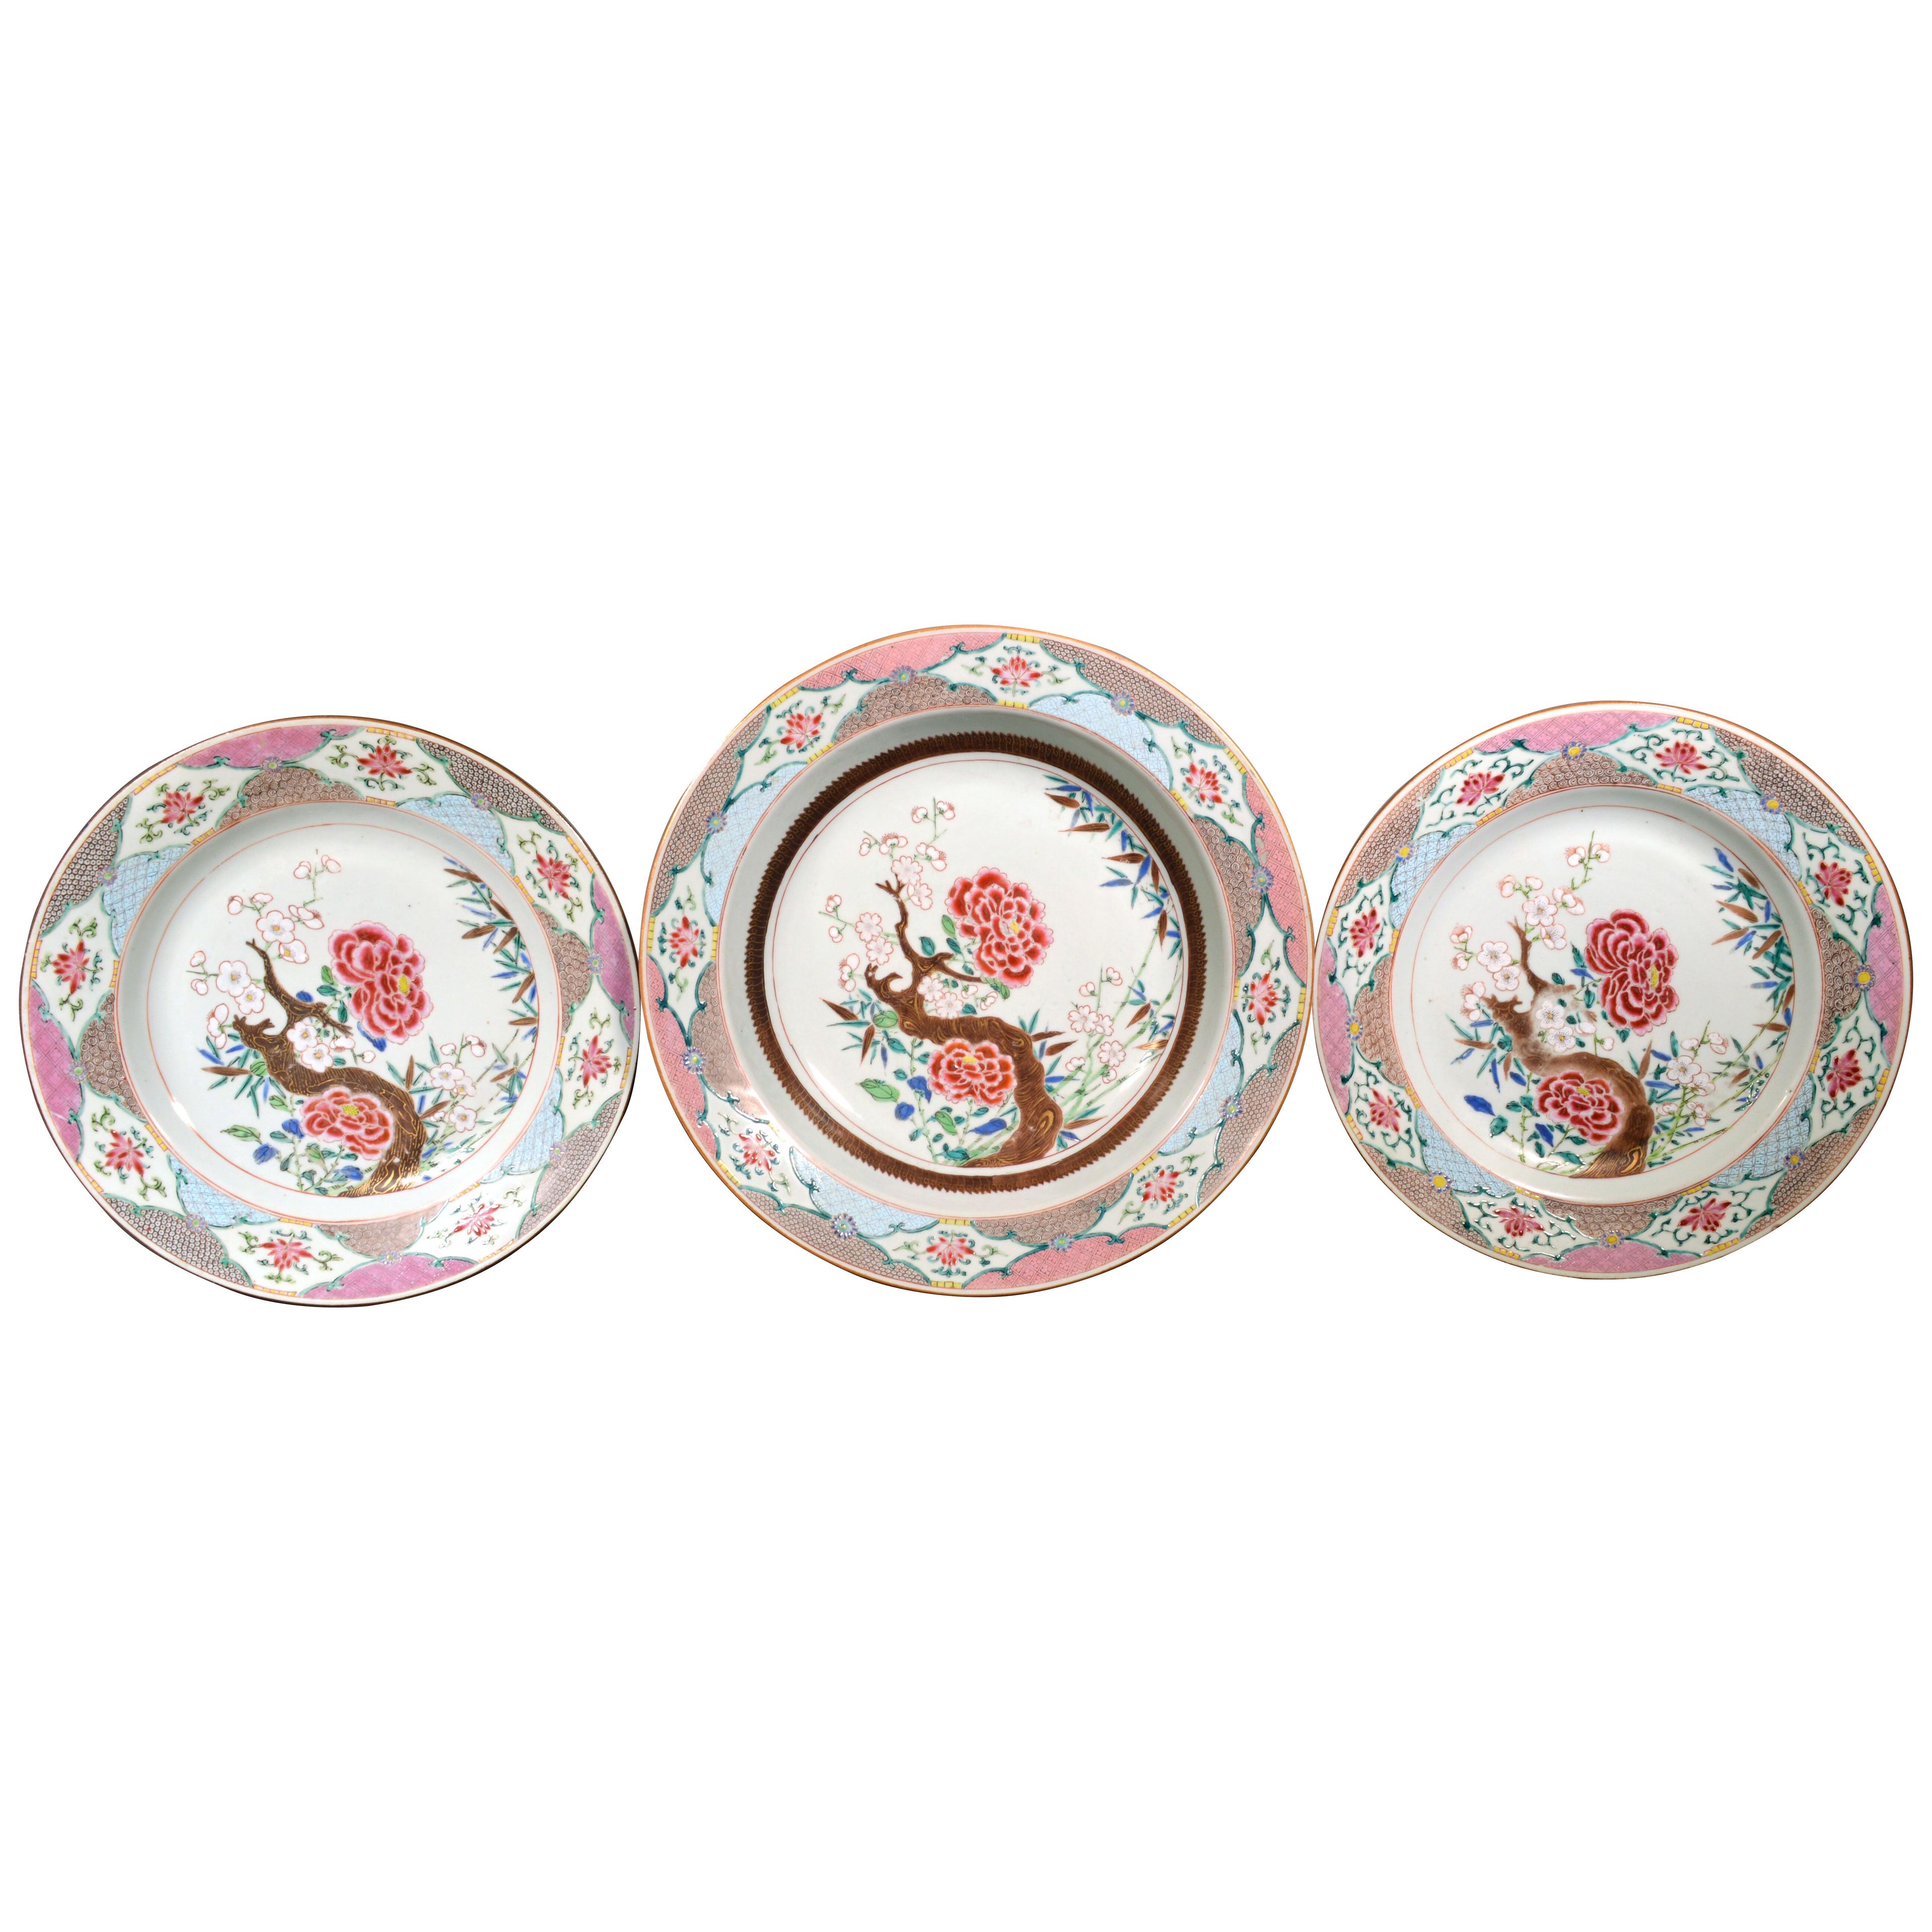 18th Century Chinese Export Famille Rose Porcelain Set